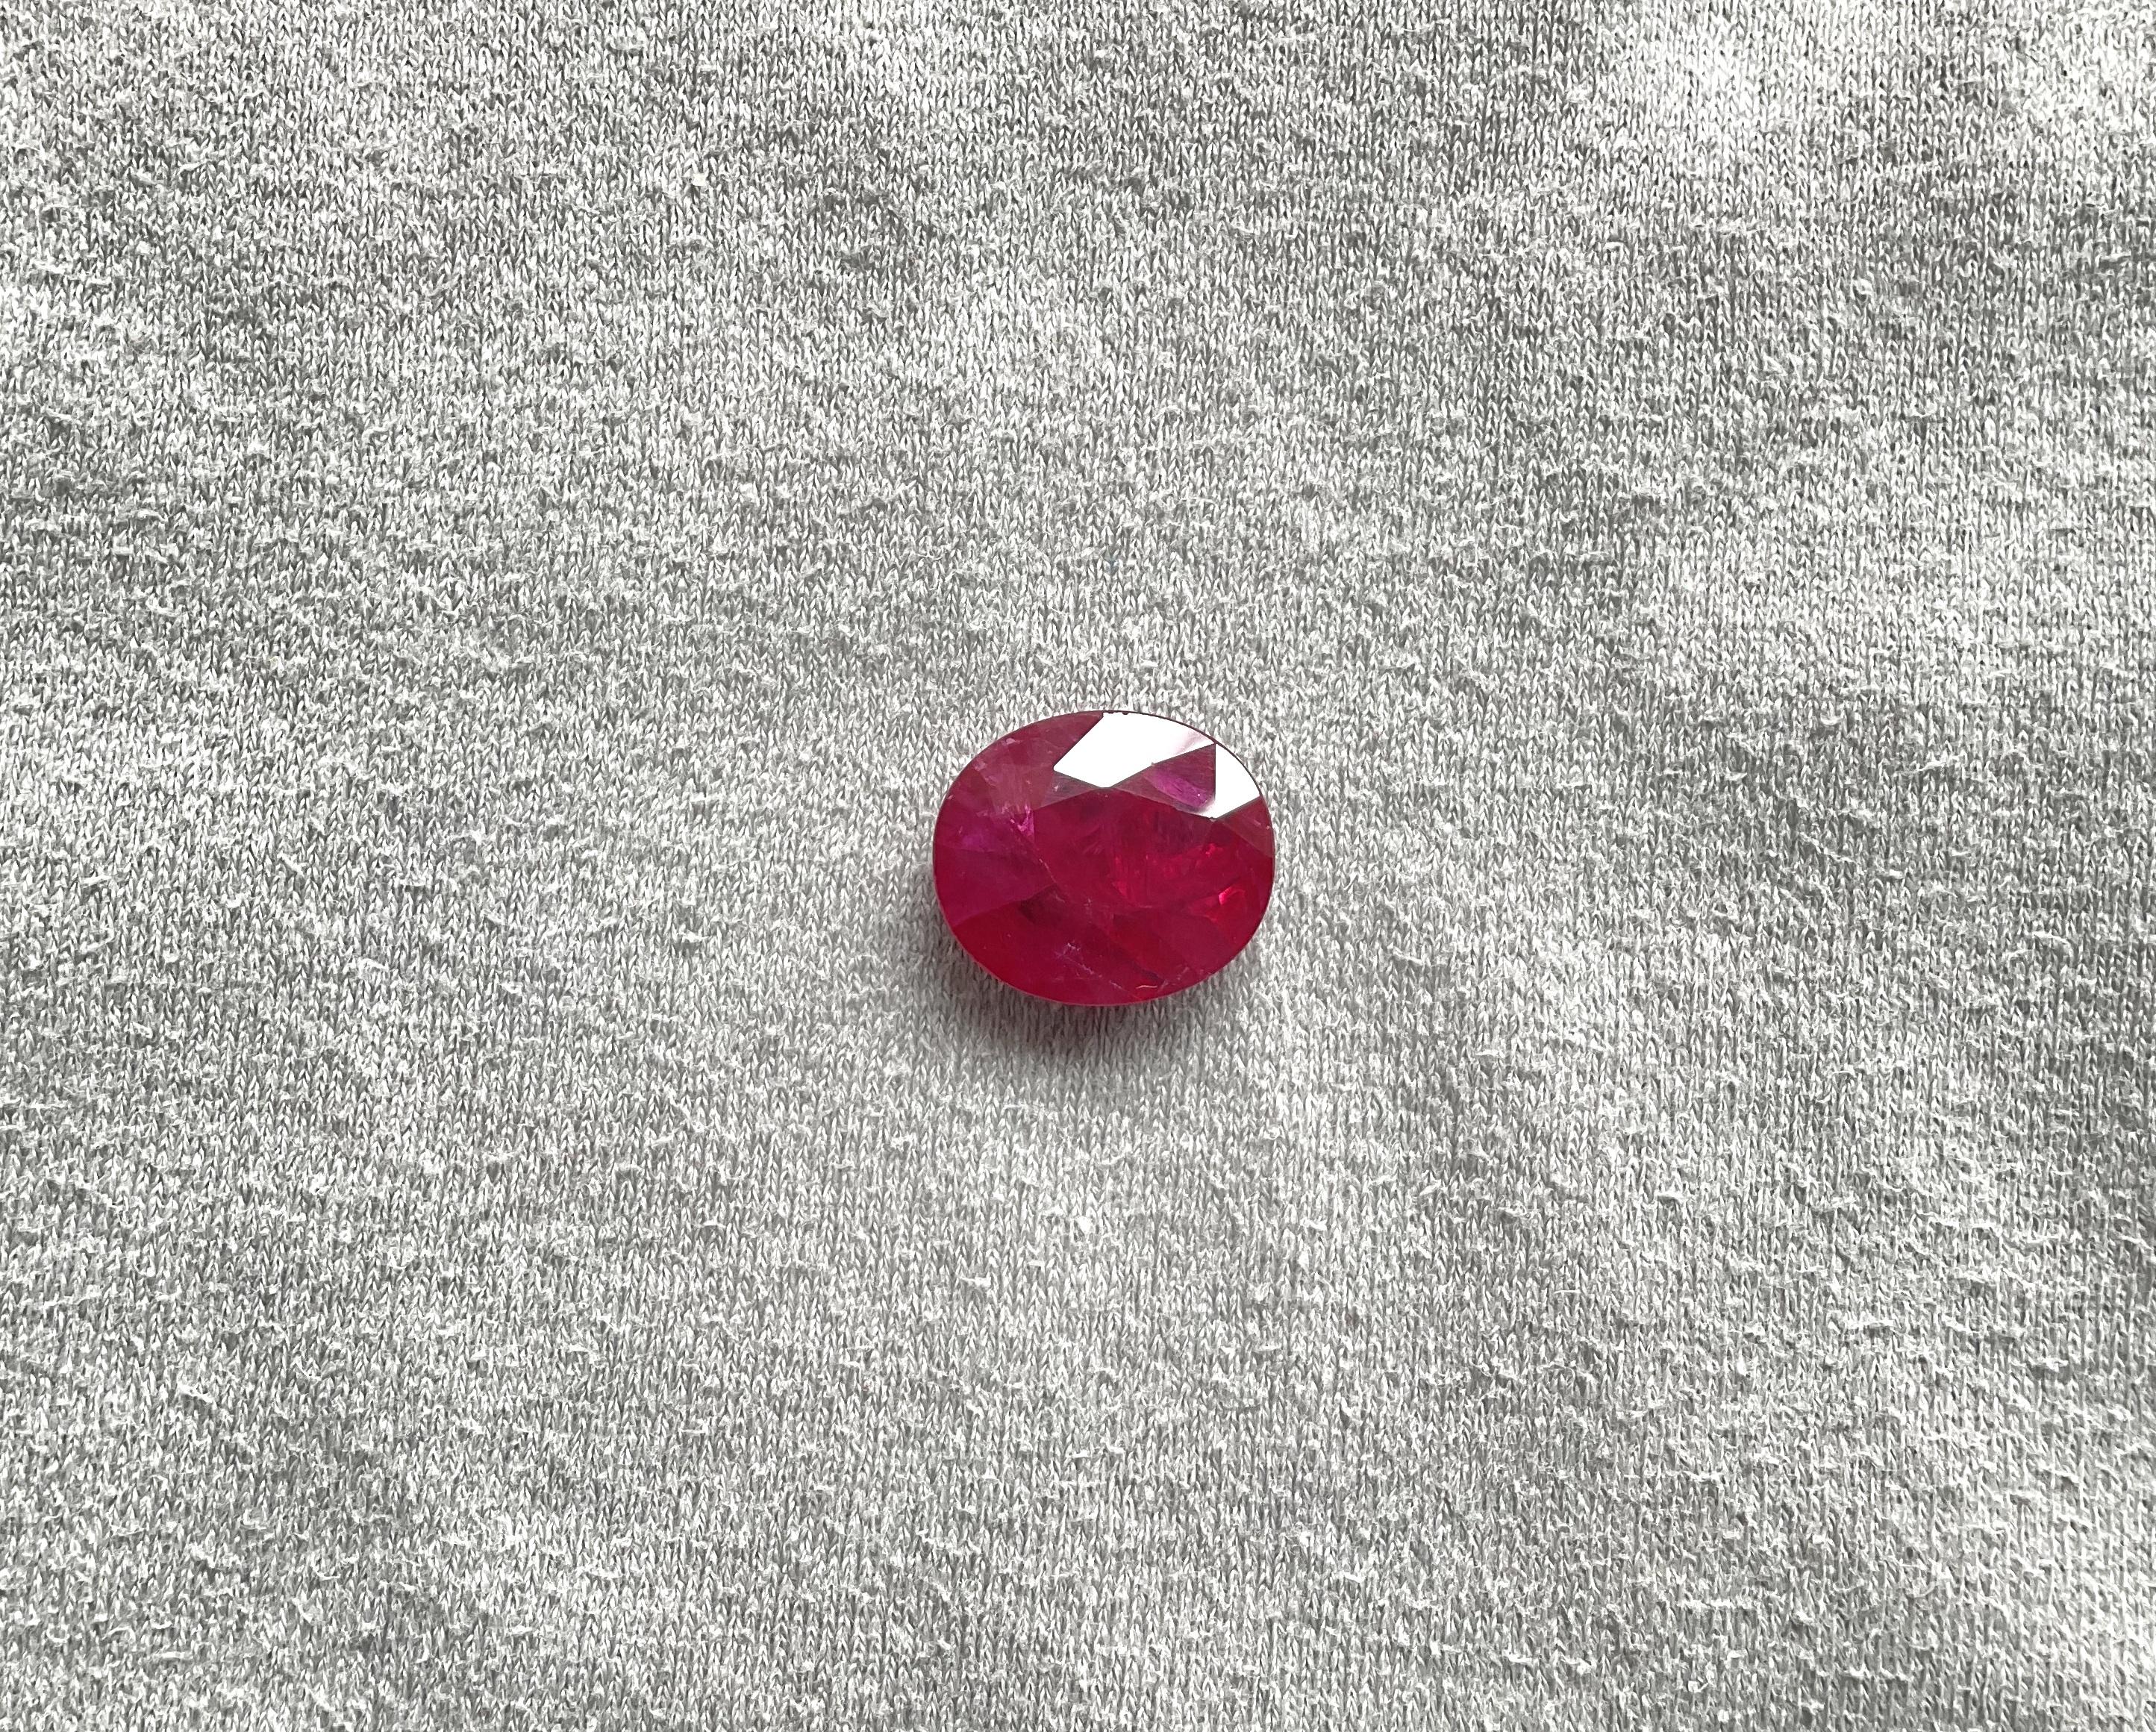 12.86 Carats Ruby Mozambique Oval Faceted Heated Cut Stone Top Quality Gemstone

Gemstone - Ruby
Weight: 12.86 Carats
Pieces: 1
Shape: oval